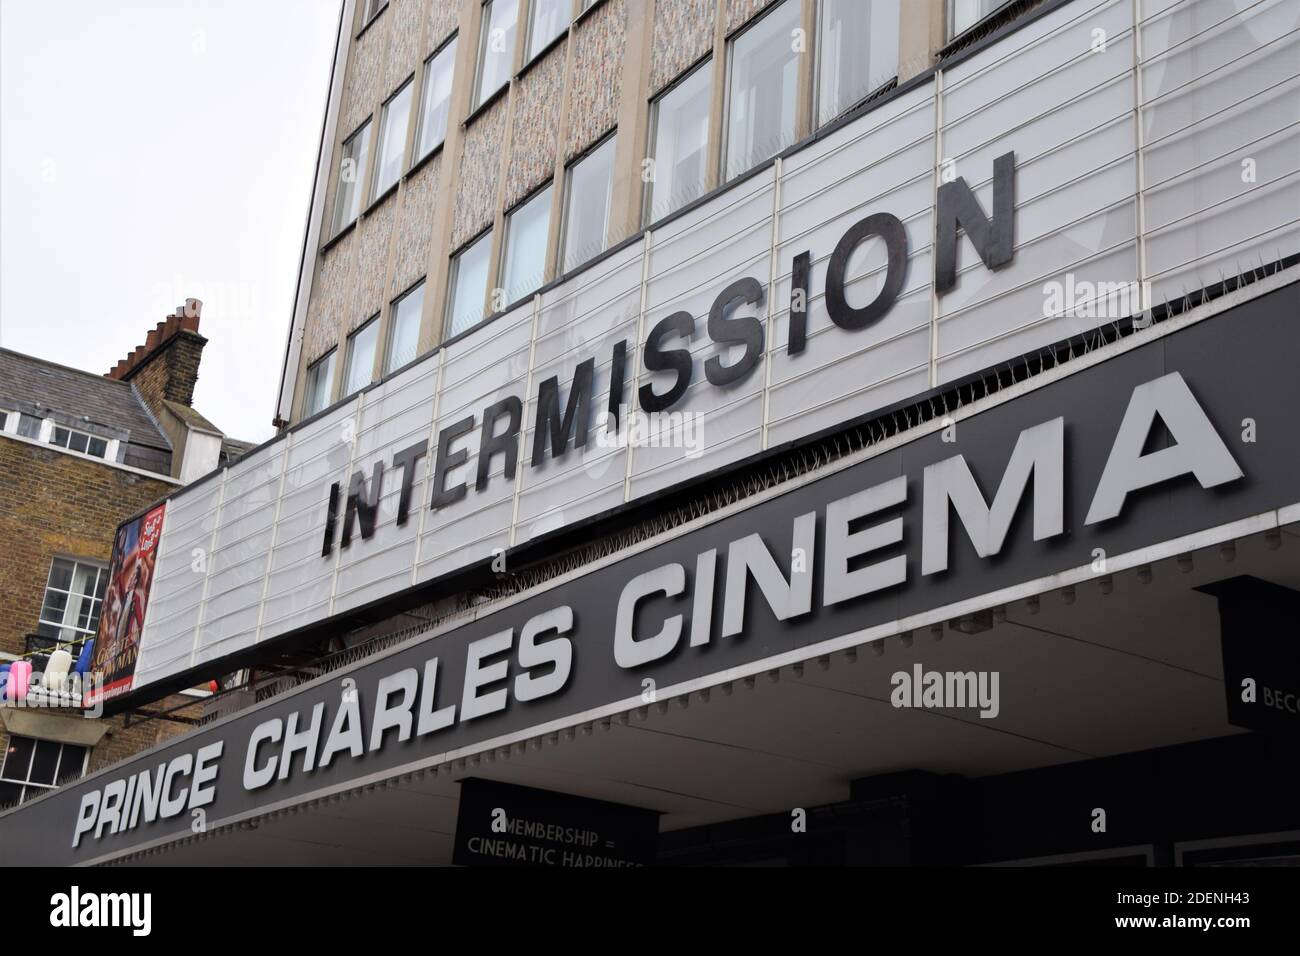 Exterior detail of Prince Charles Cinema West End, London, closed during the second national coronavirus lockdown in England. Stock Photo